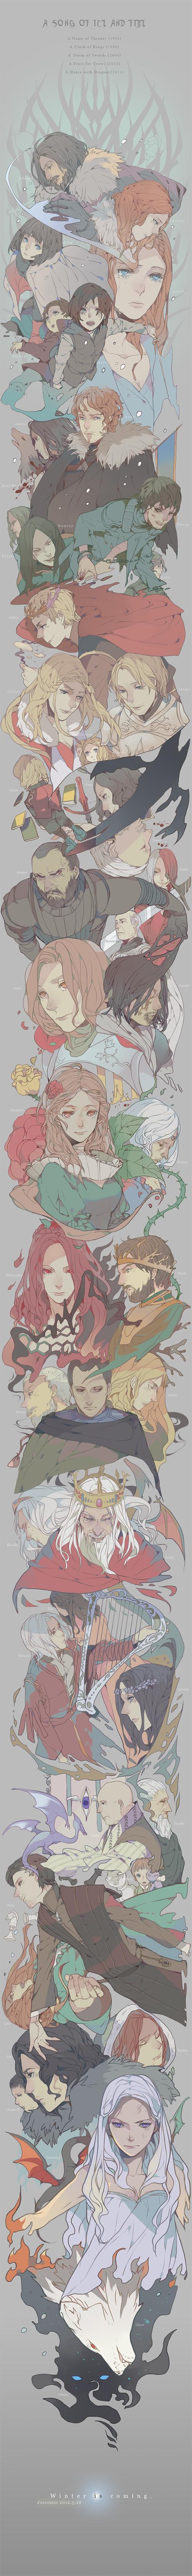 a song of ice and fire by joscomie d5lzgm4 Game of Thrones Characters, Anime Style